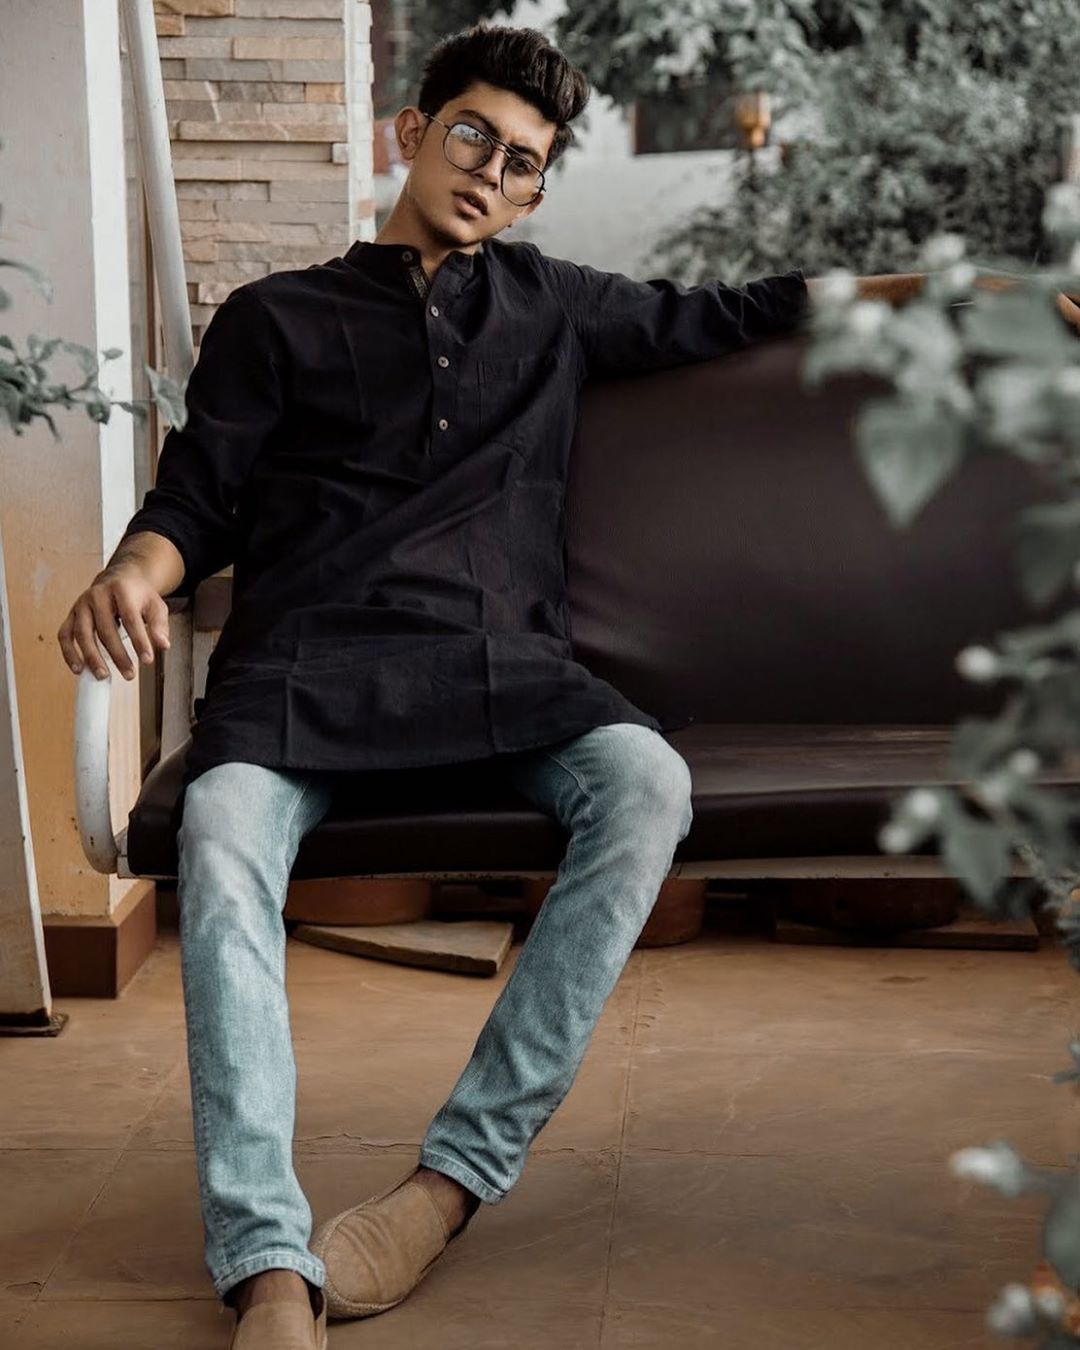 MYNTRA - Looking at the trending memes & wondering who is this #Binod ? 
📸 @fenil_ganatra
For similar styles look up product code: 10711542 / 6914199 / 11653402 / 6968228
For more on-point looks, styl...